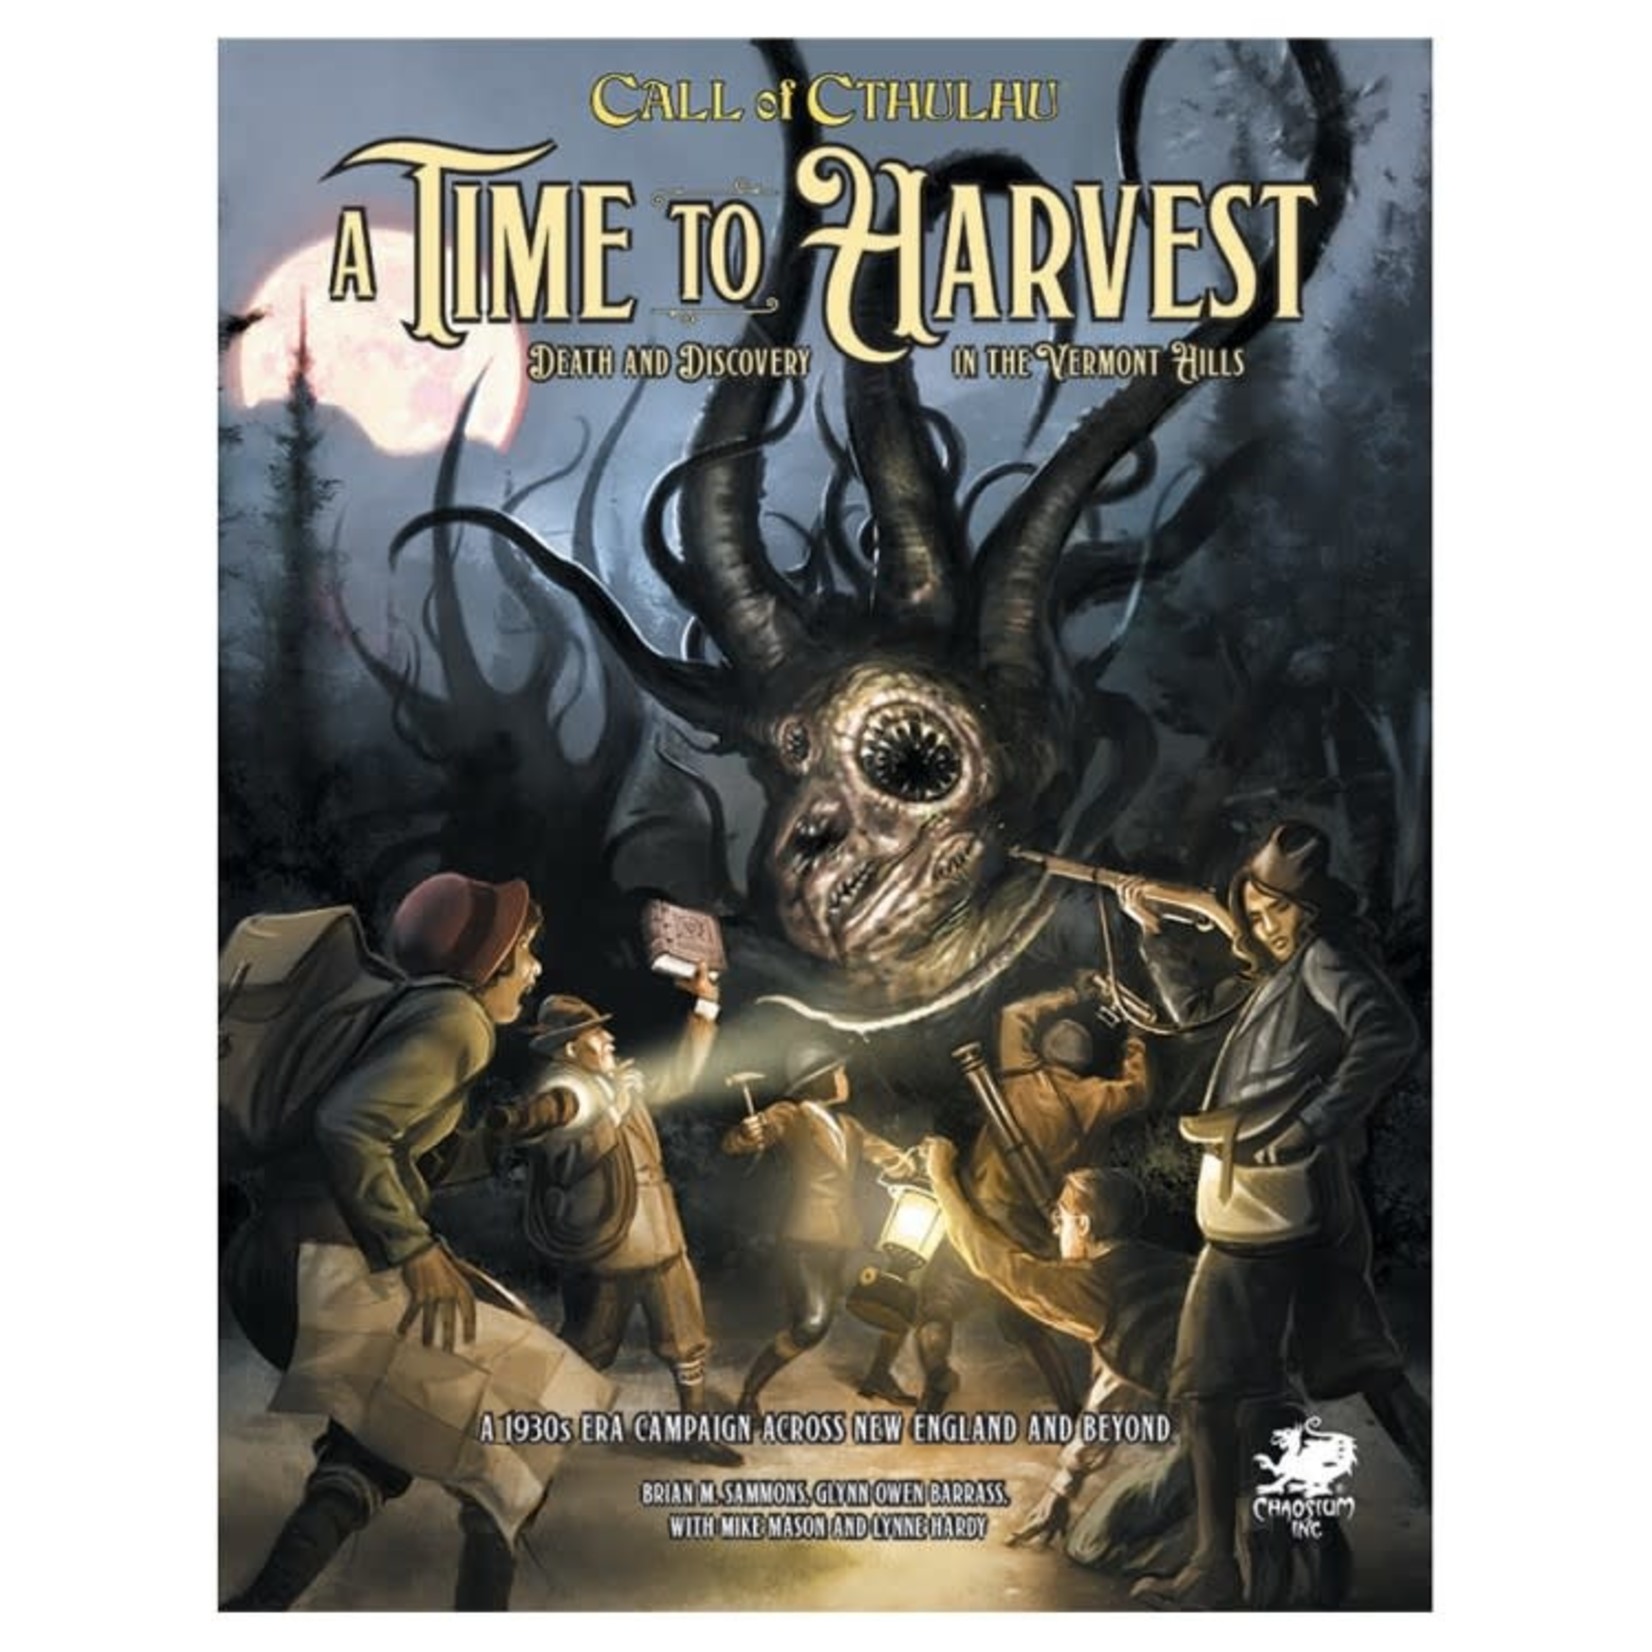 Chaosium Call of Cthulhu A Time to Harvest